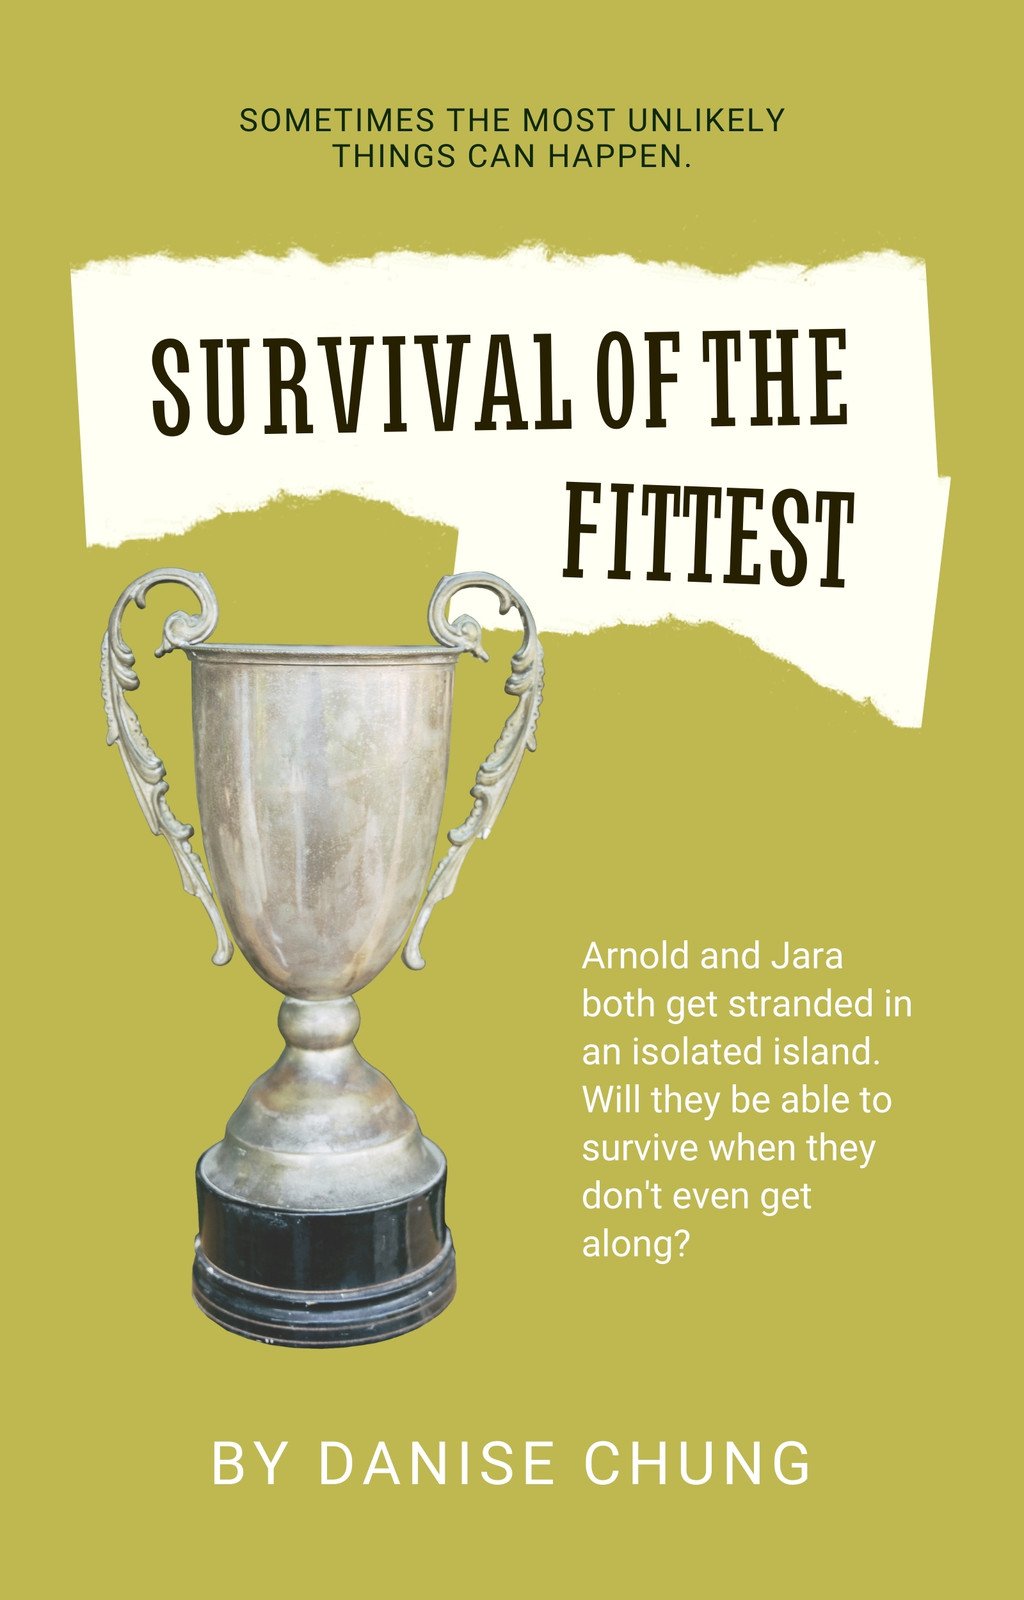 Green and Beige Simple Trophy Illustration Island Survival Wattpad Book Cover